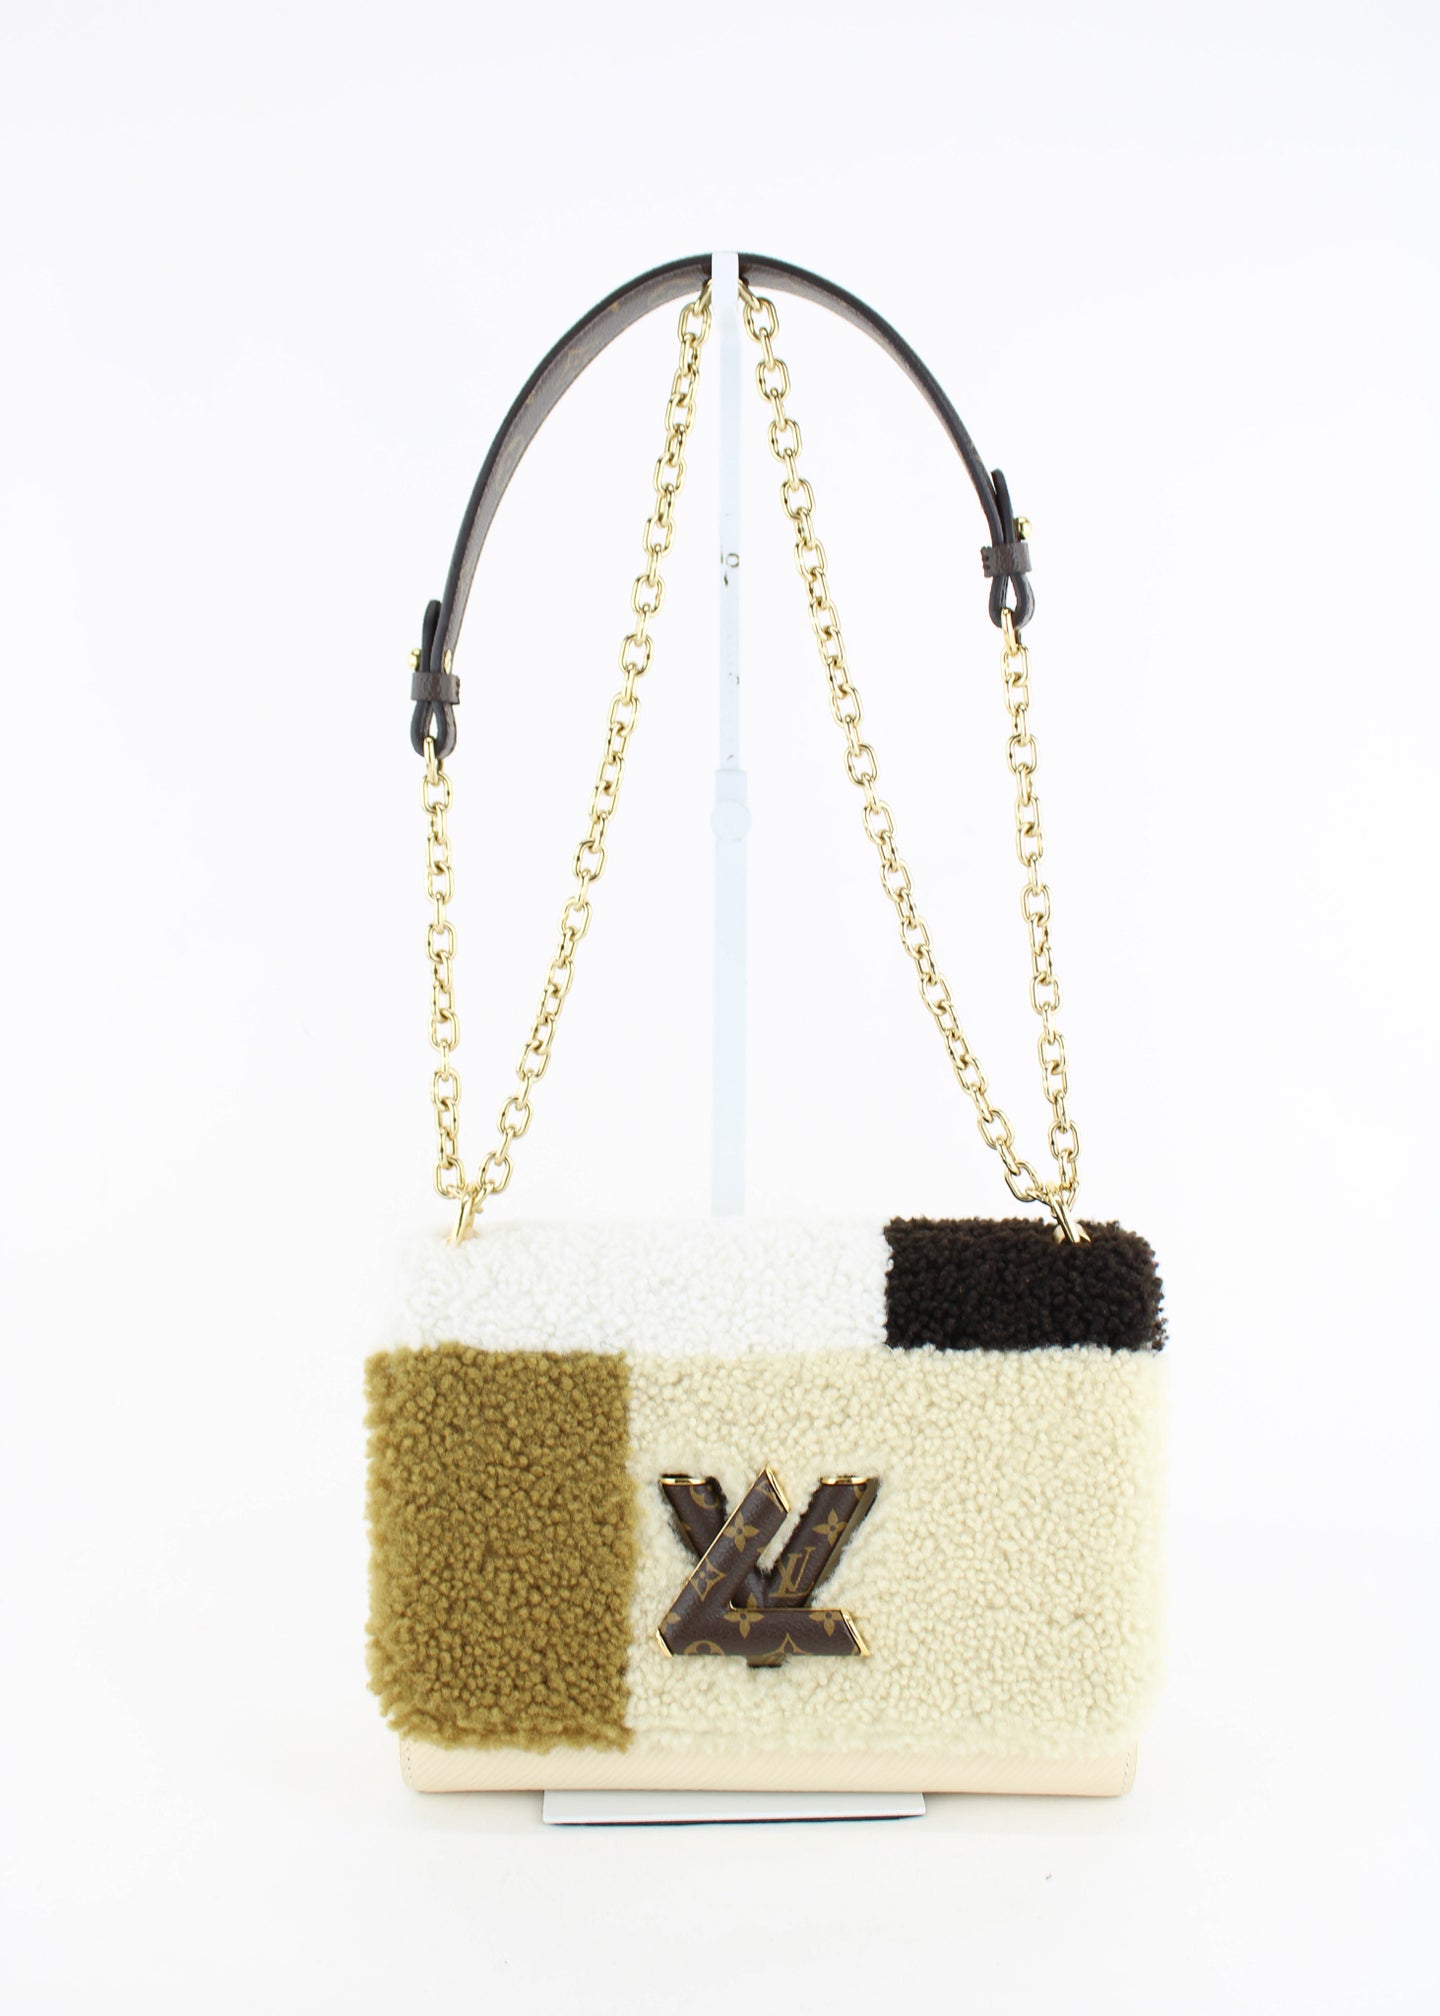 Limited Edition Louis Vuitton Twist Bag With Colored Lock